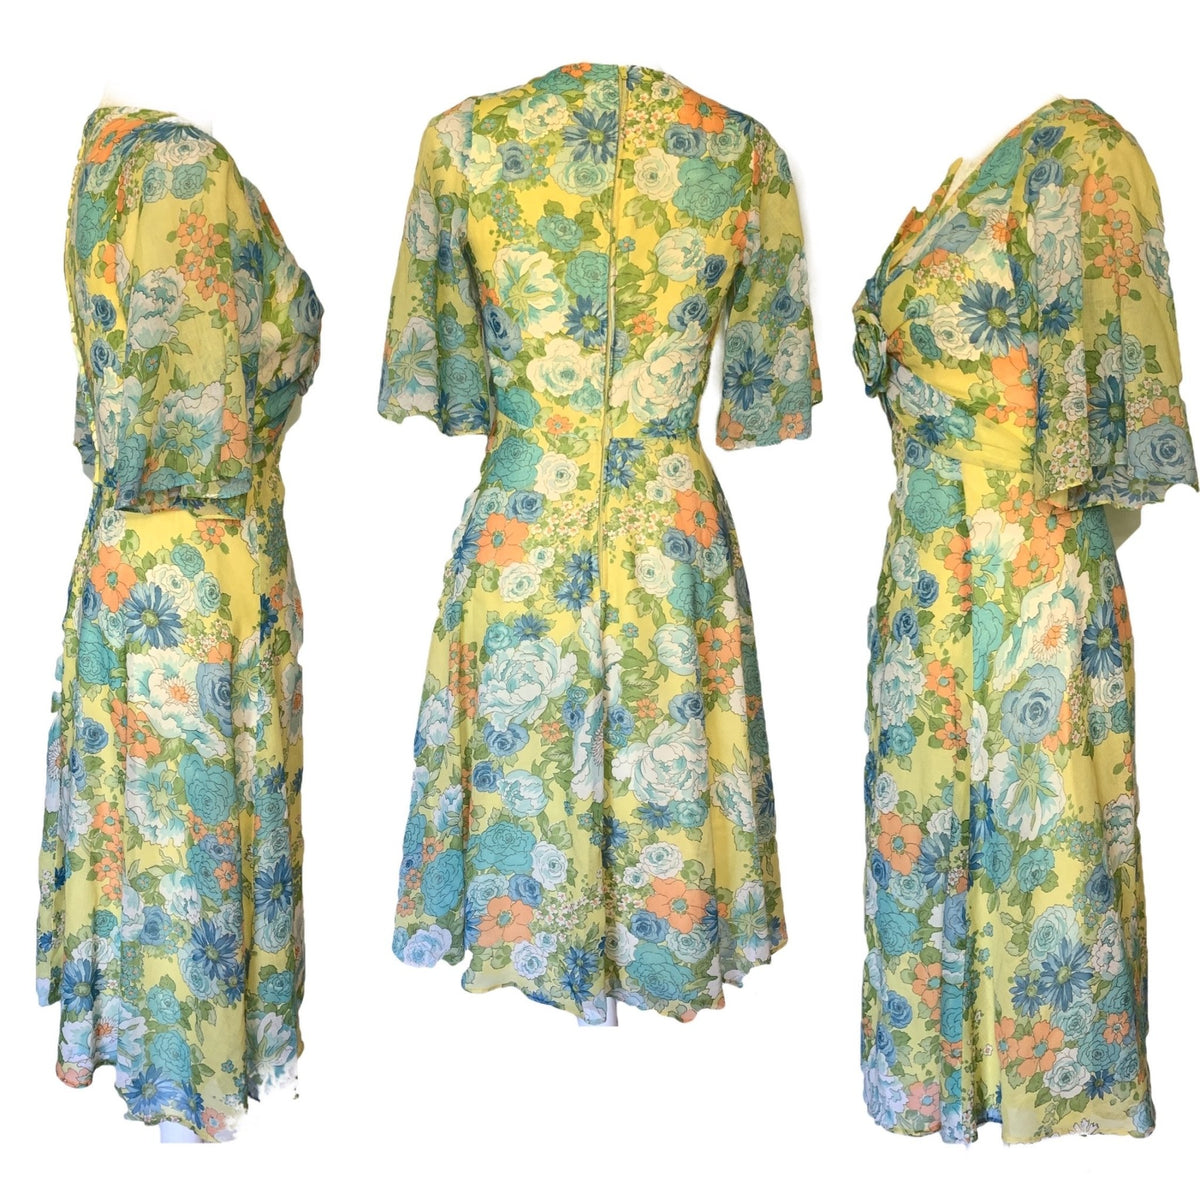 1960s Floral Summer Midi Dress by Miss Elliette with a Green, Blue and